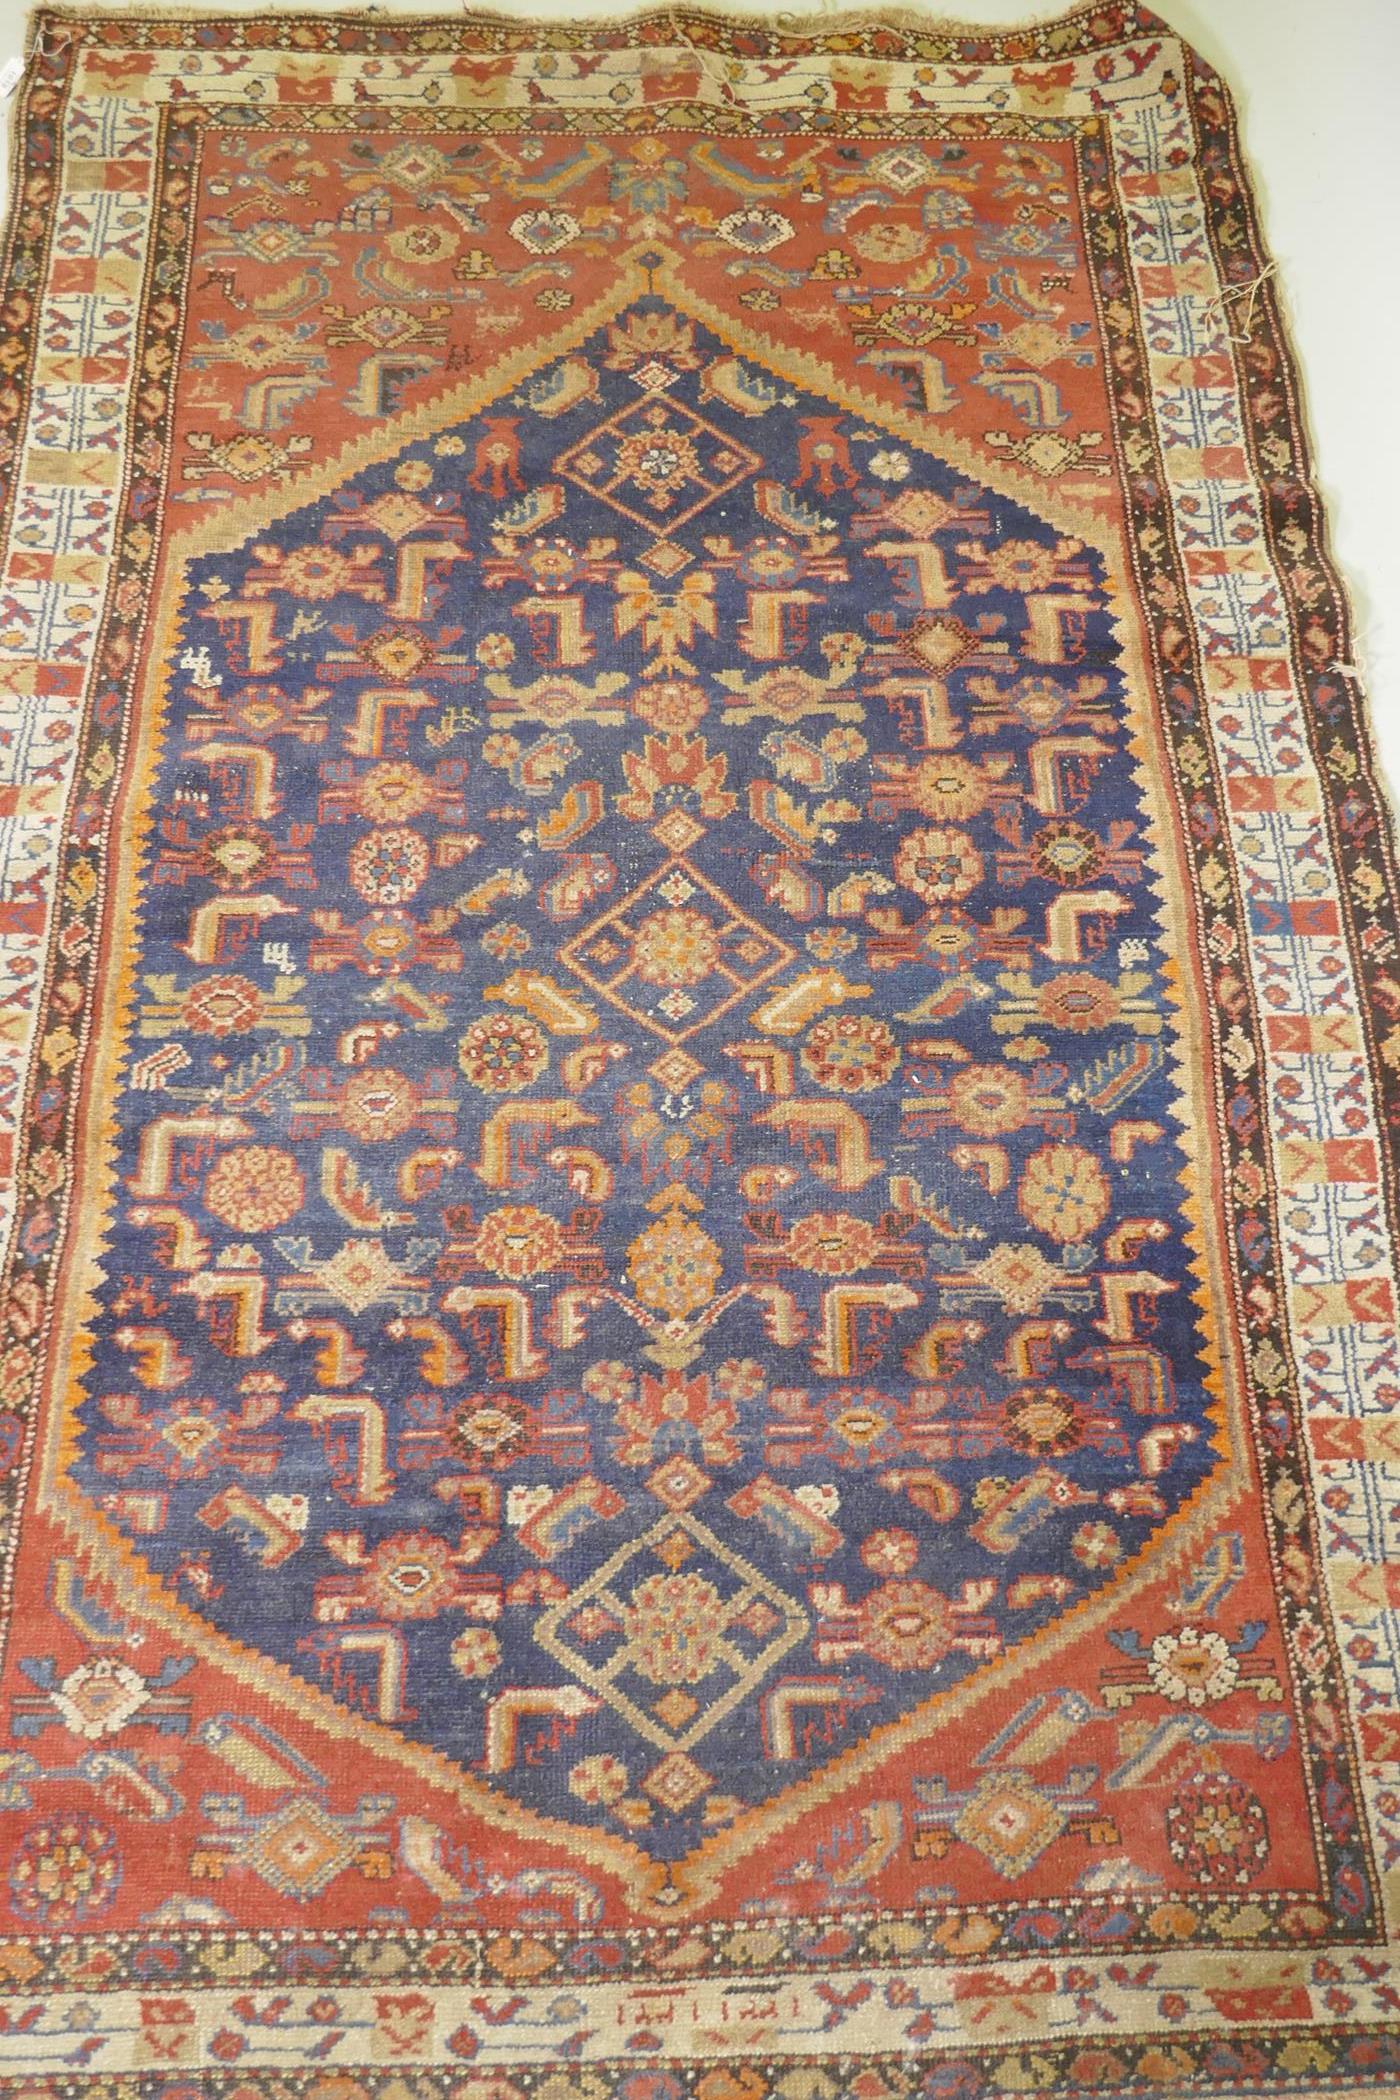 An antique Persian hand woven wool carpet, with medallion design on a red and blue field with - Image 4 of 5